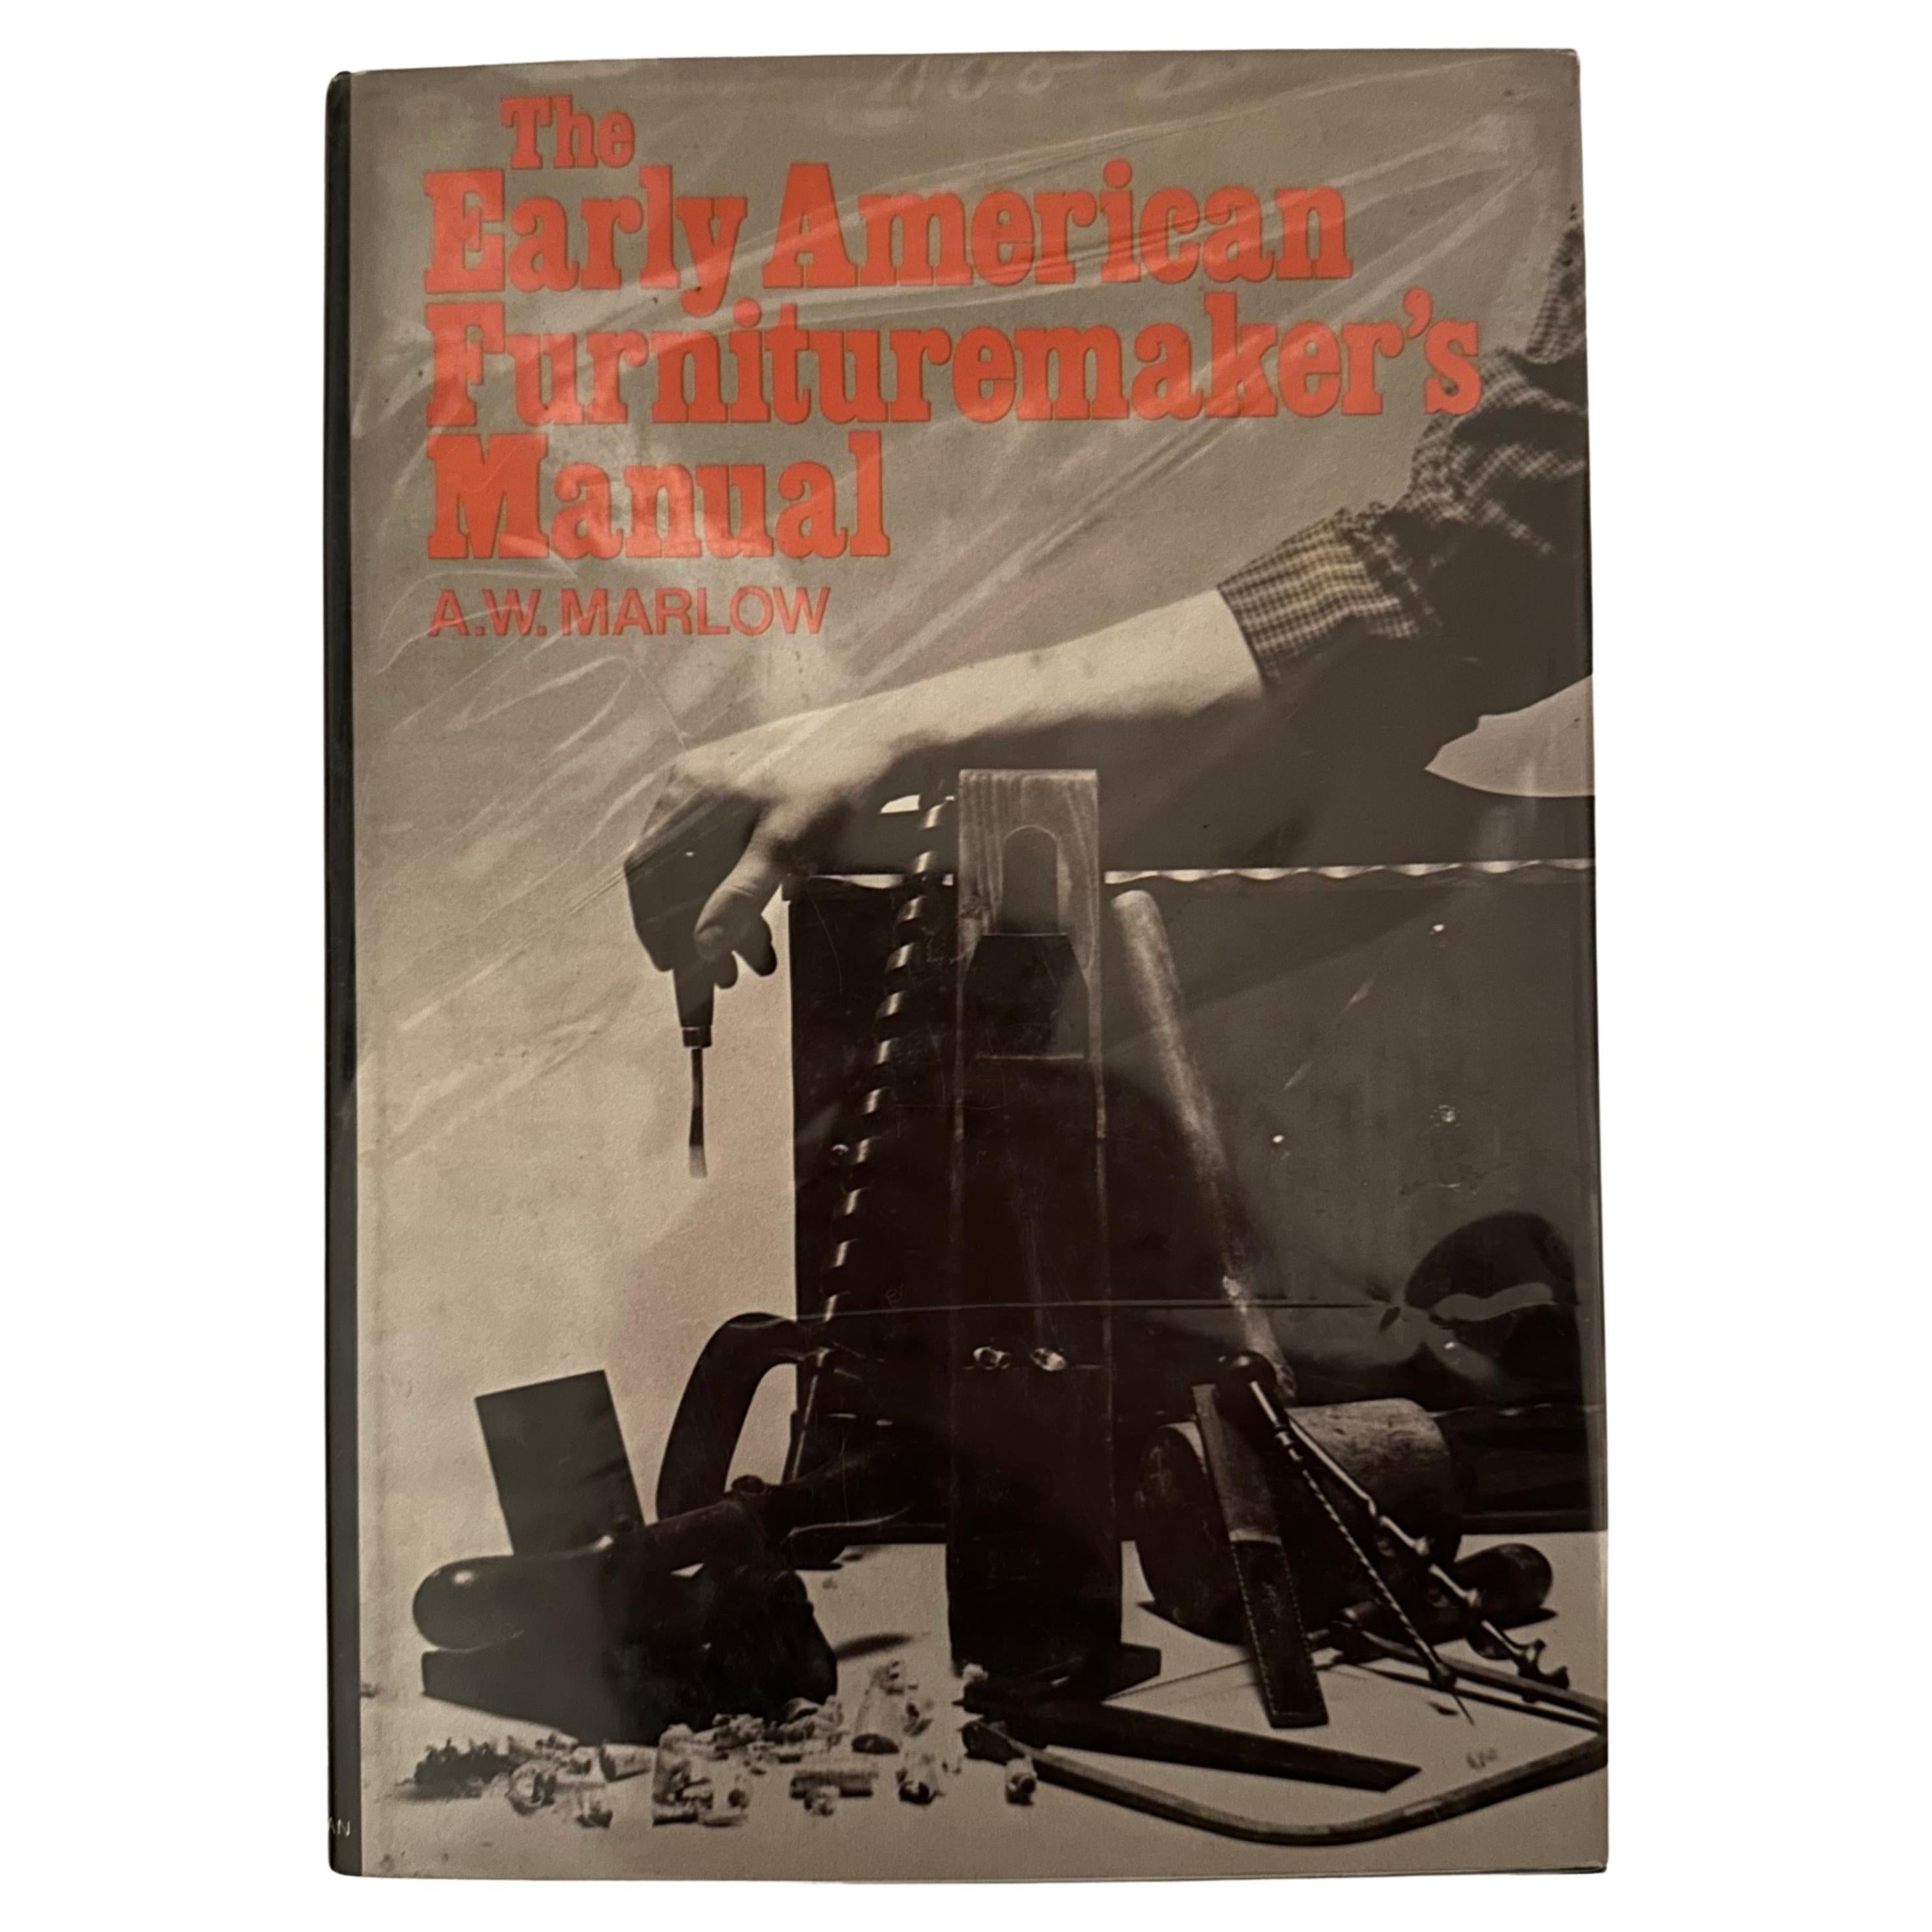 The Early American Furniture Maker's Manual - A. W. Marlow - New York, 1974 For Sale